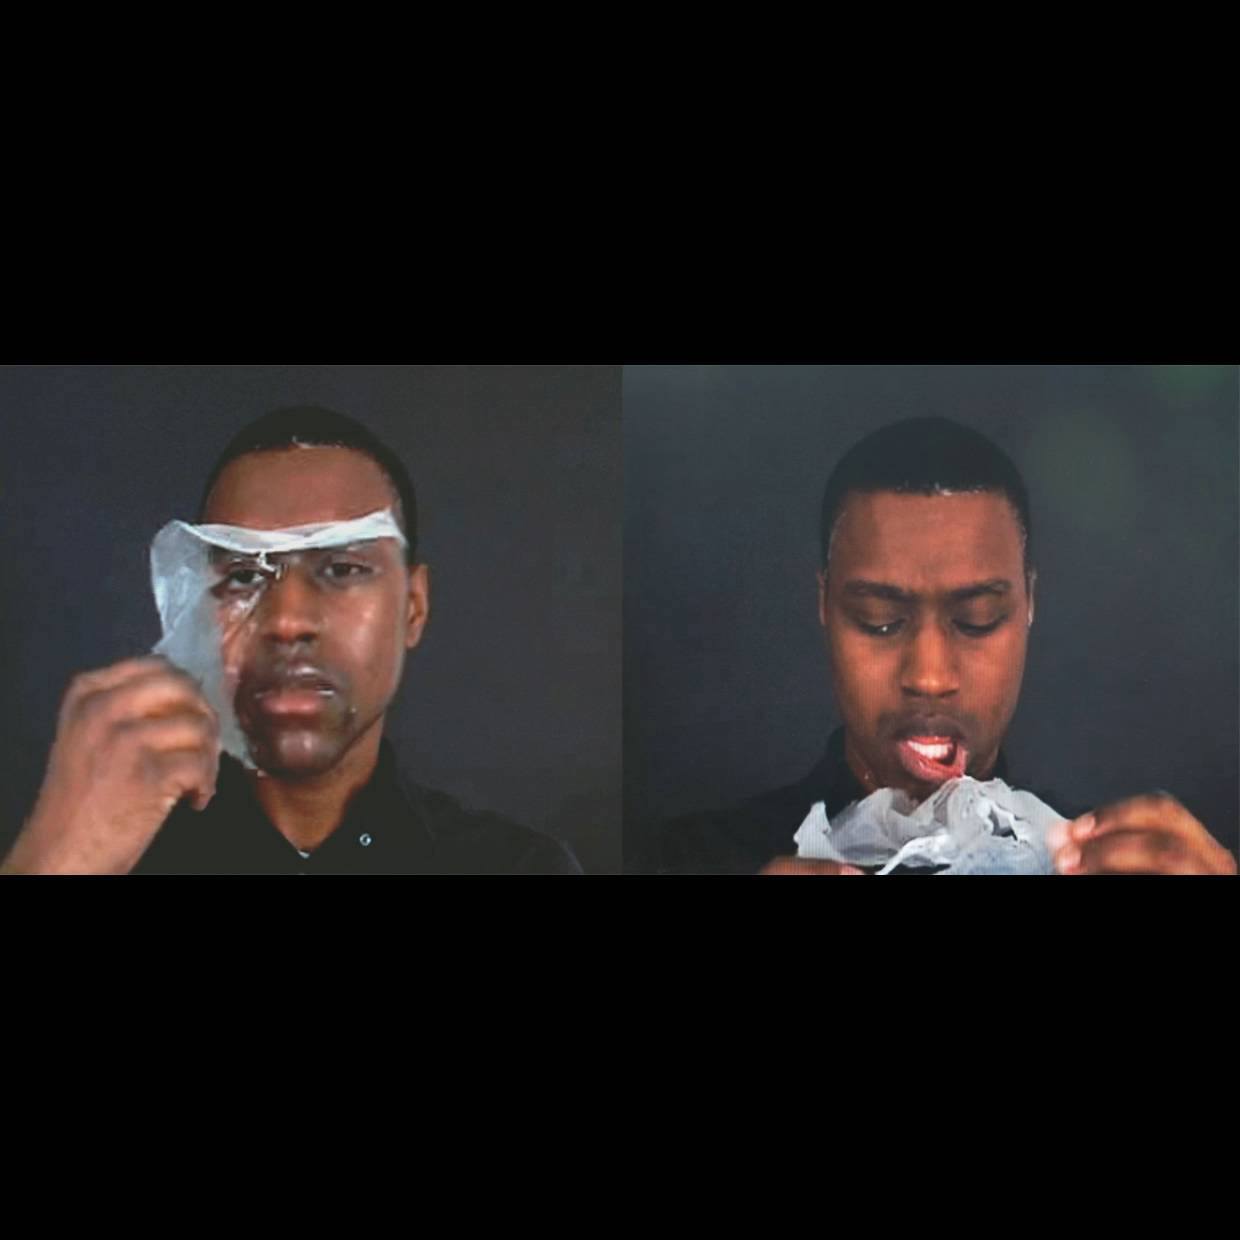 Two images of a man removing a clear skin from his face